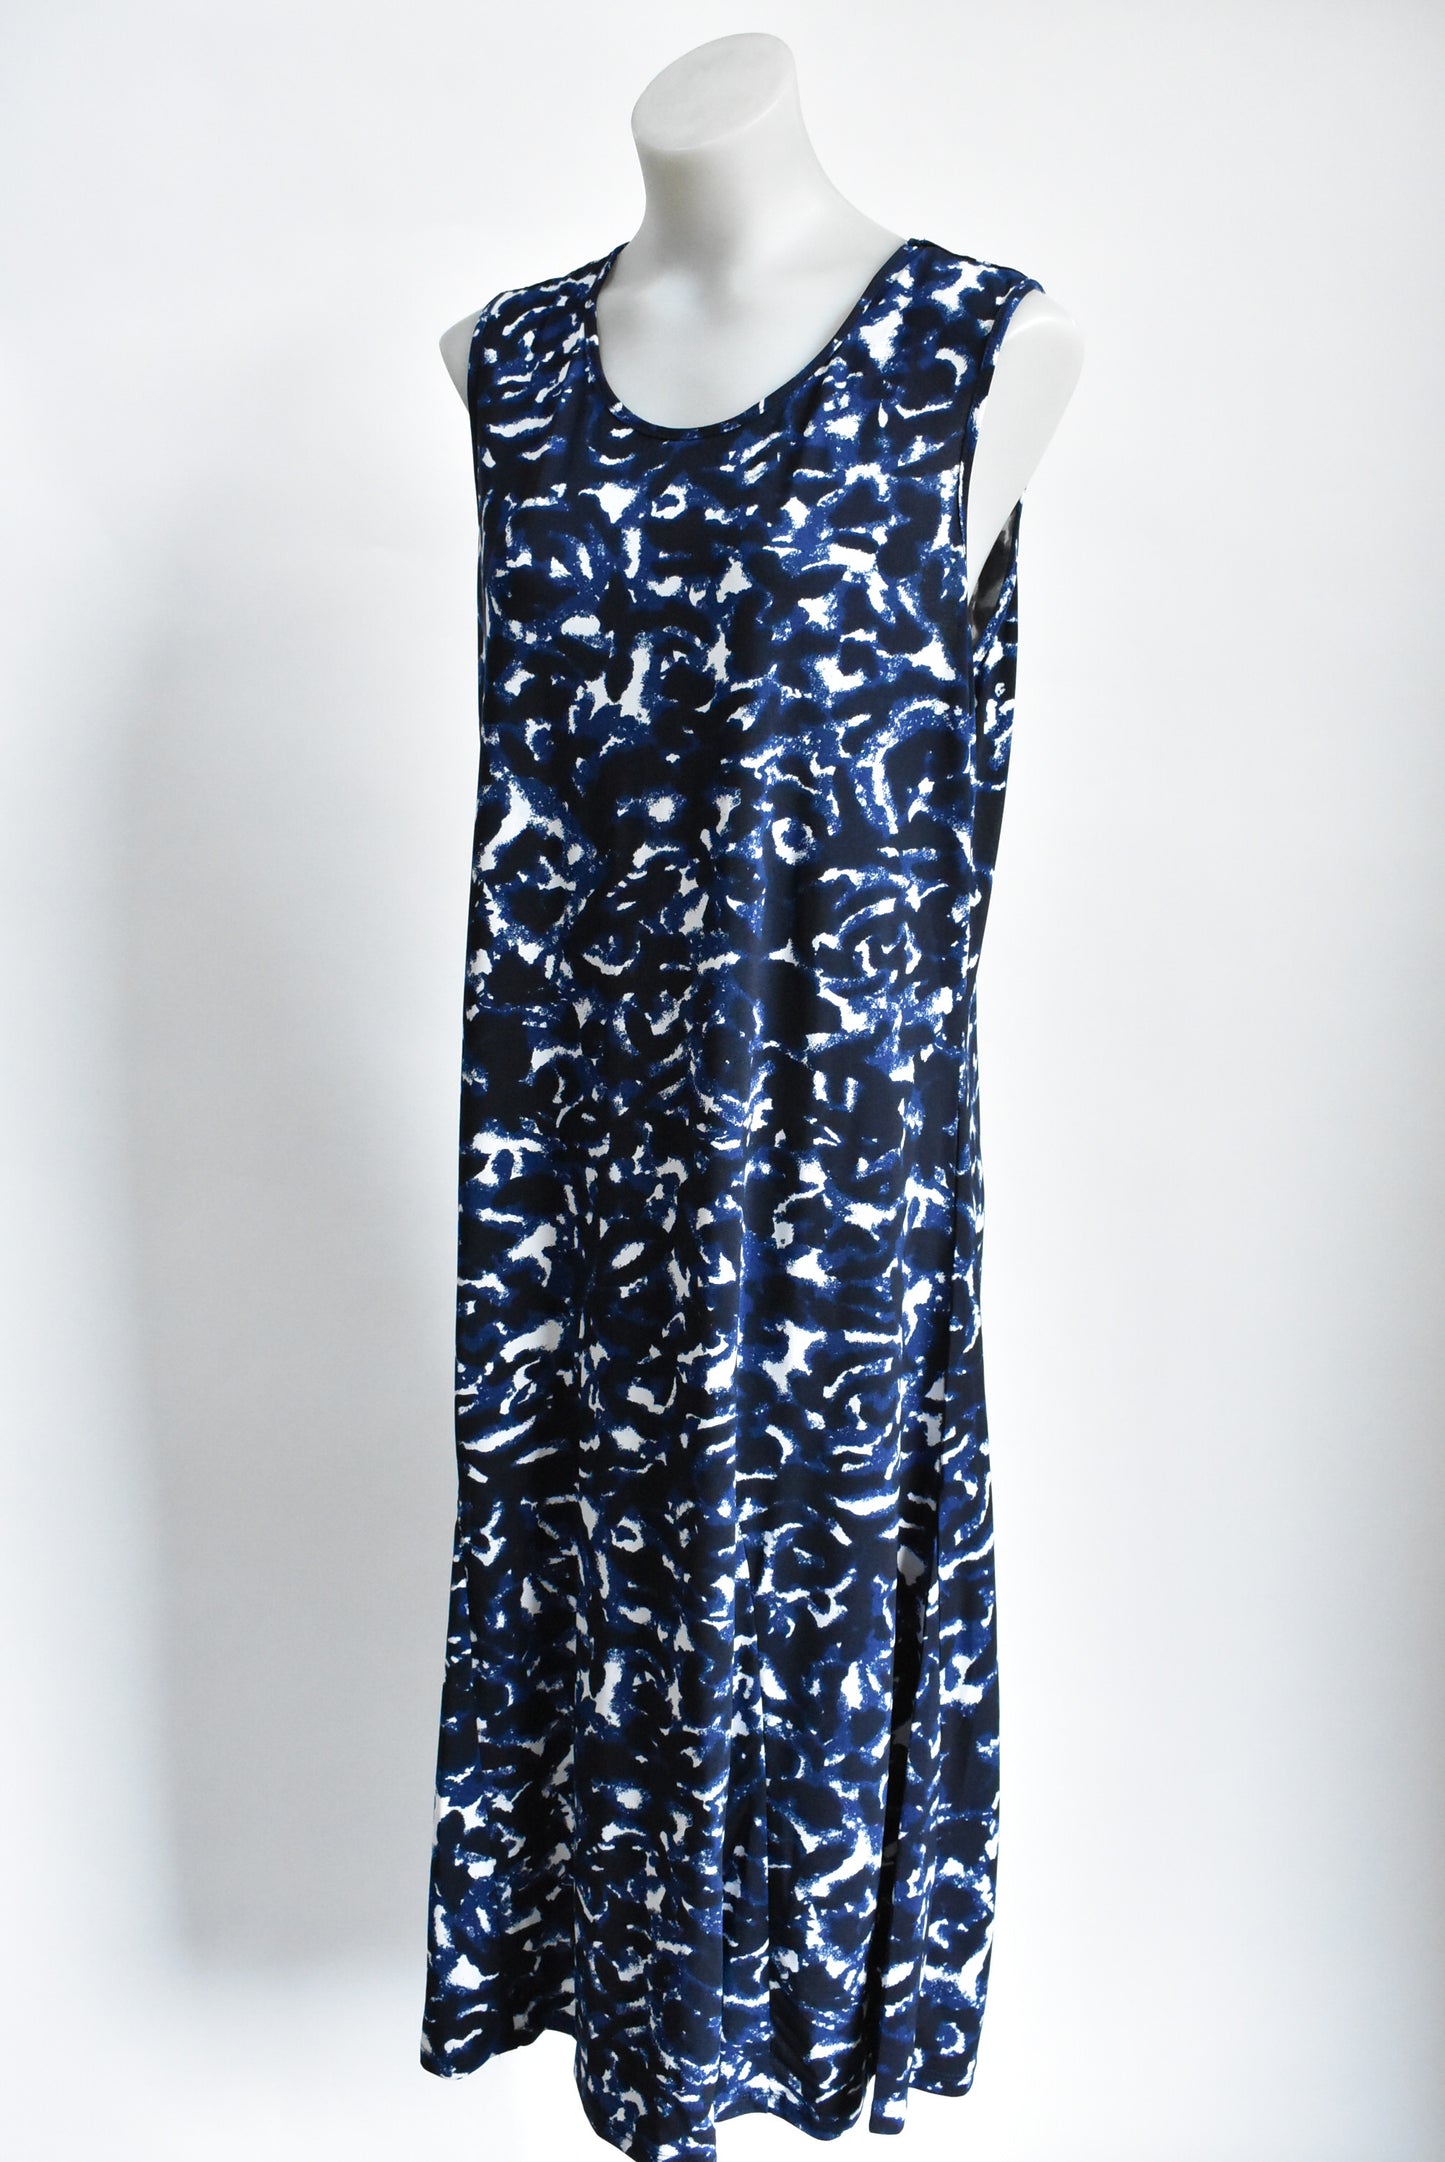 Millers long dress, 16 (NWT)